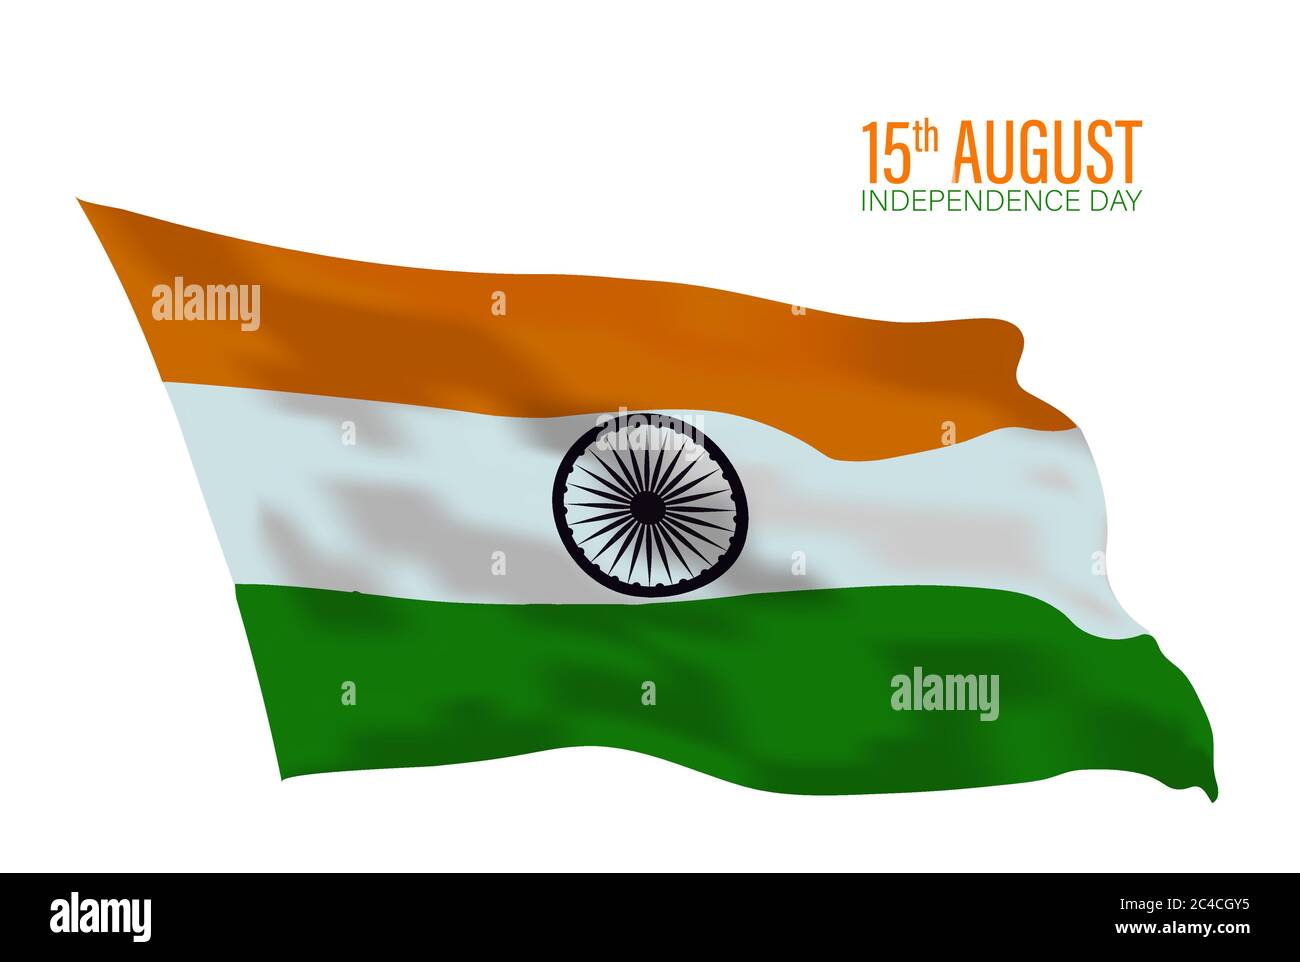 Independence day of India 15th august showing waving fabric style flag with balloons vector illustration design Stock Vector